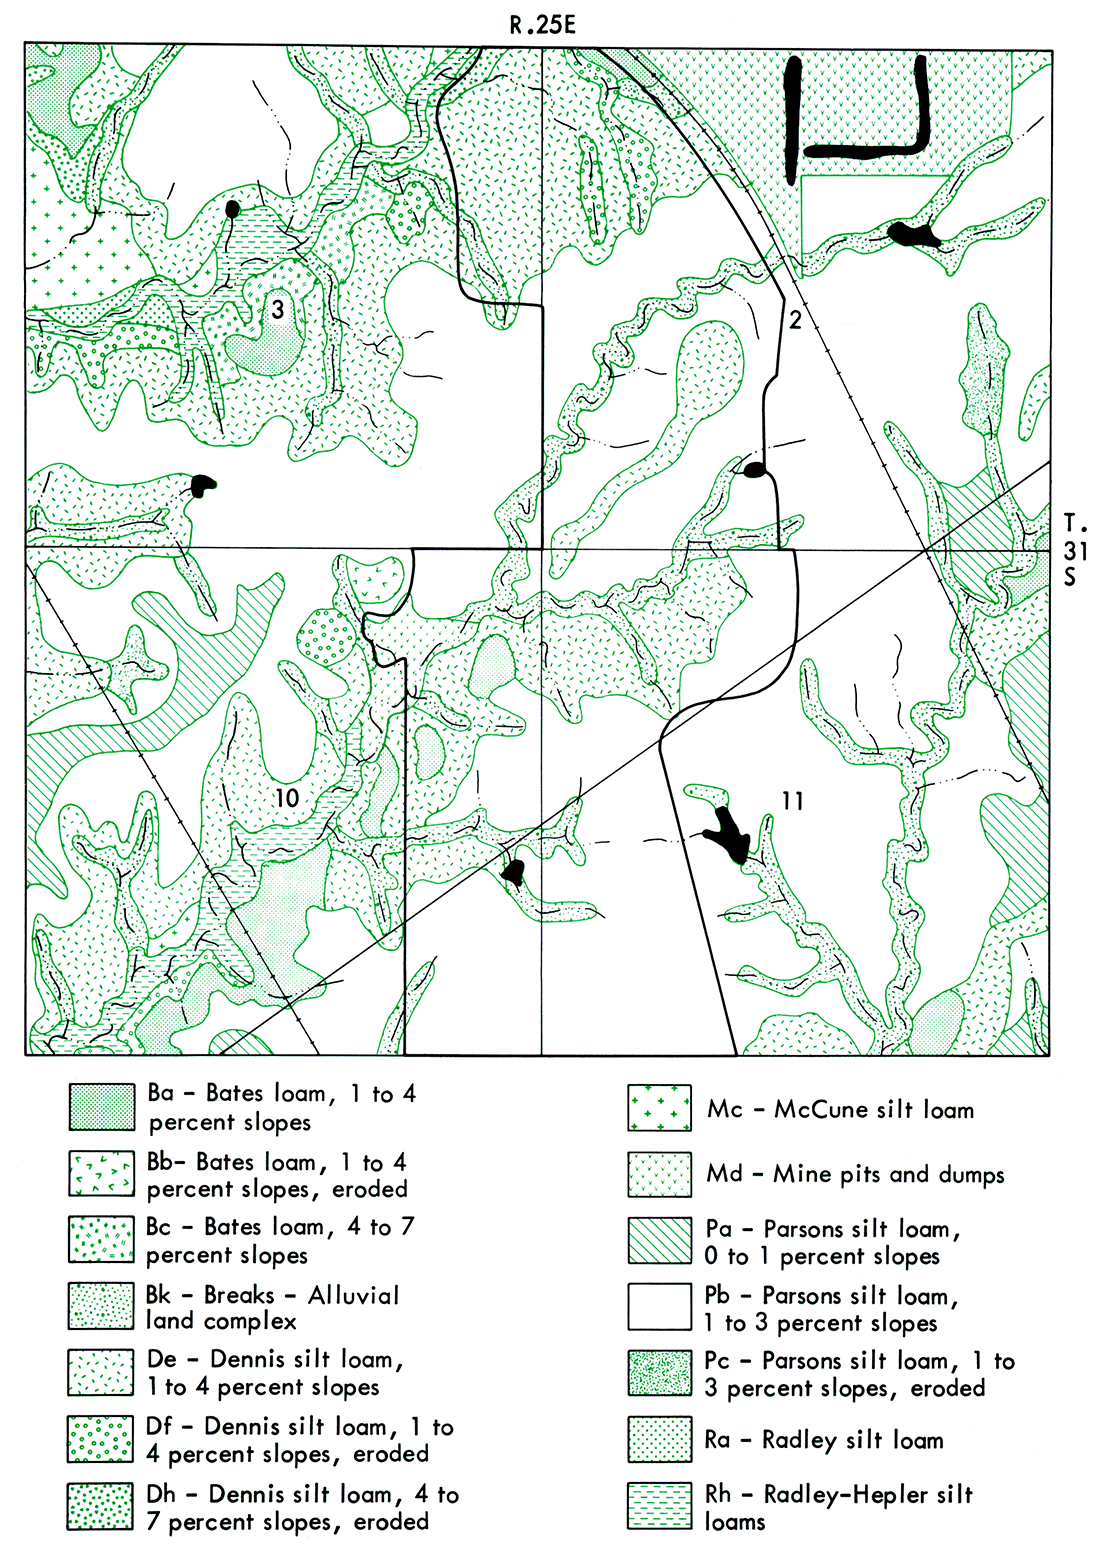 Map of soils of Fields 1-7 before mining.